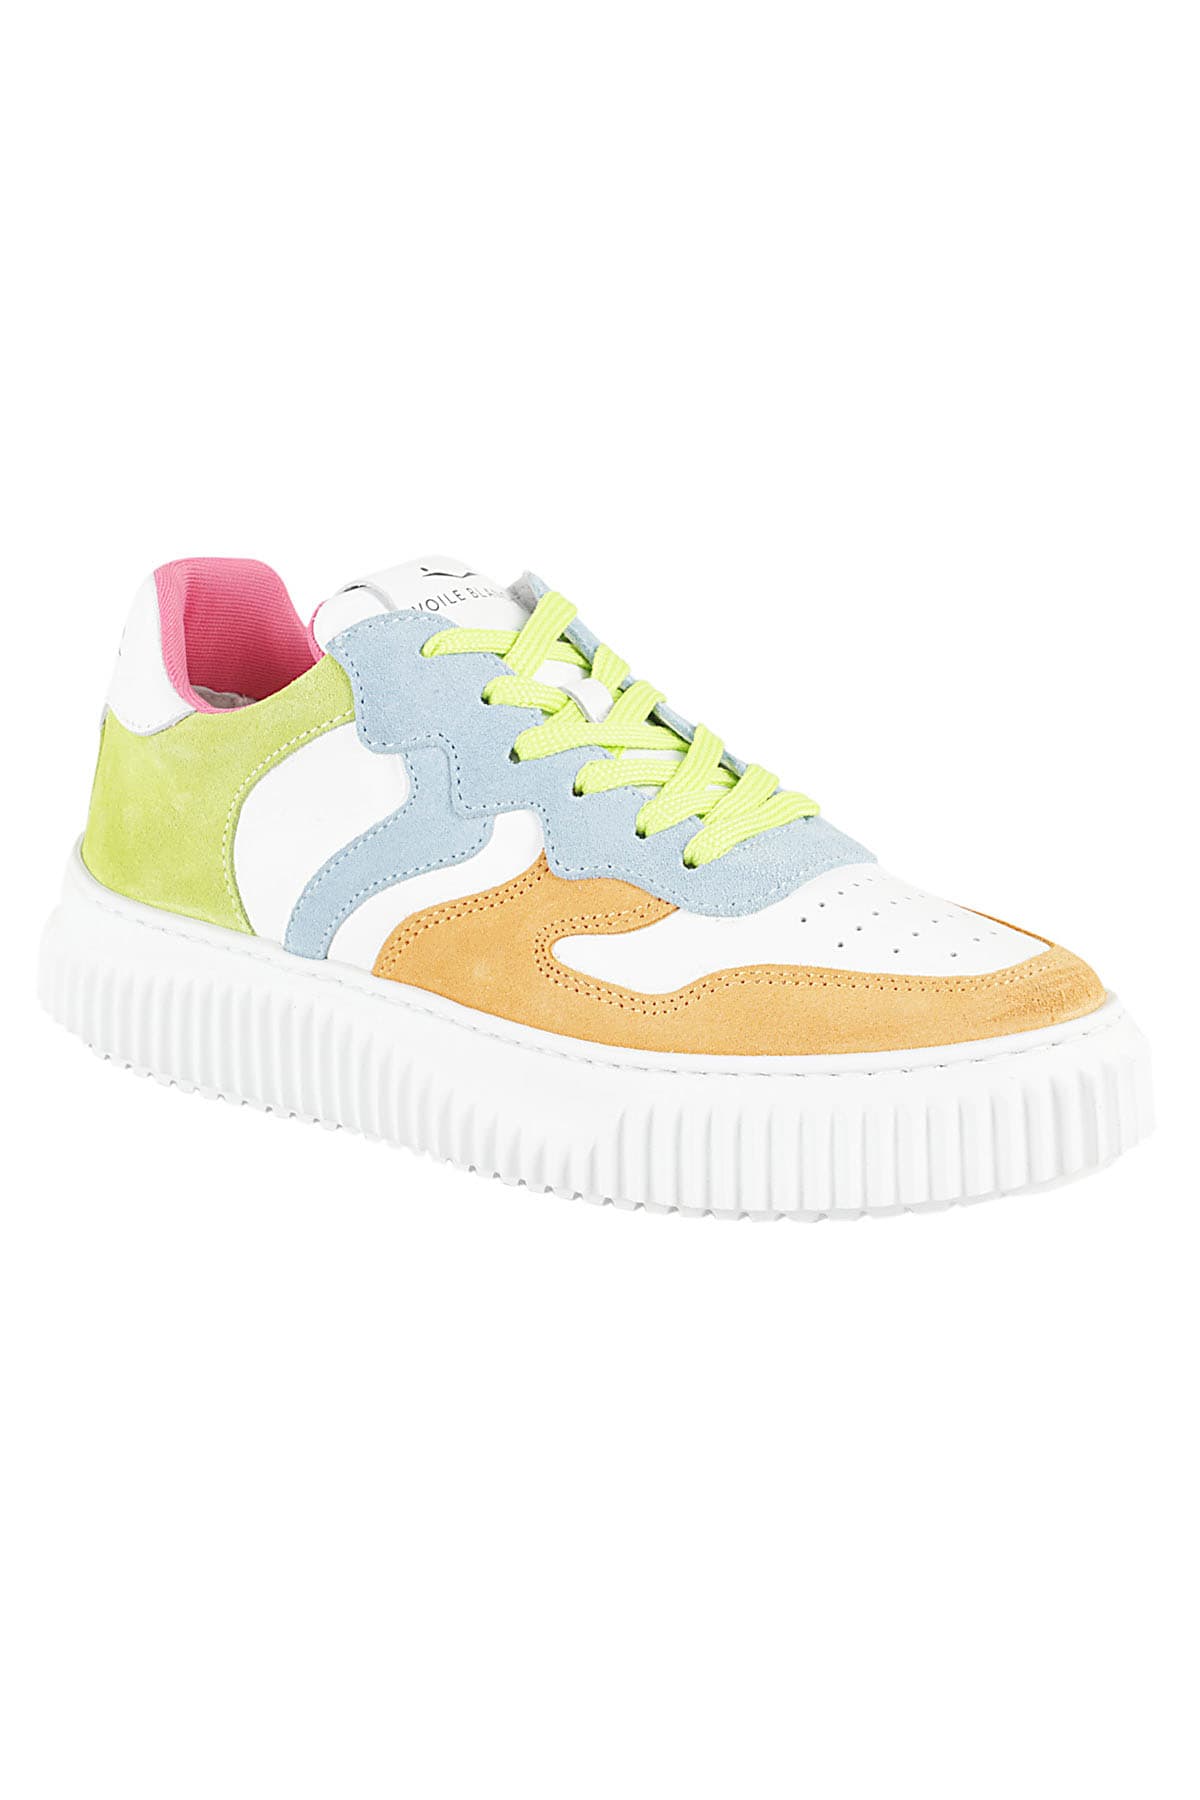 Shop Voile Blanche Laura Suede In Peach Sky Blue Lime